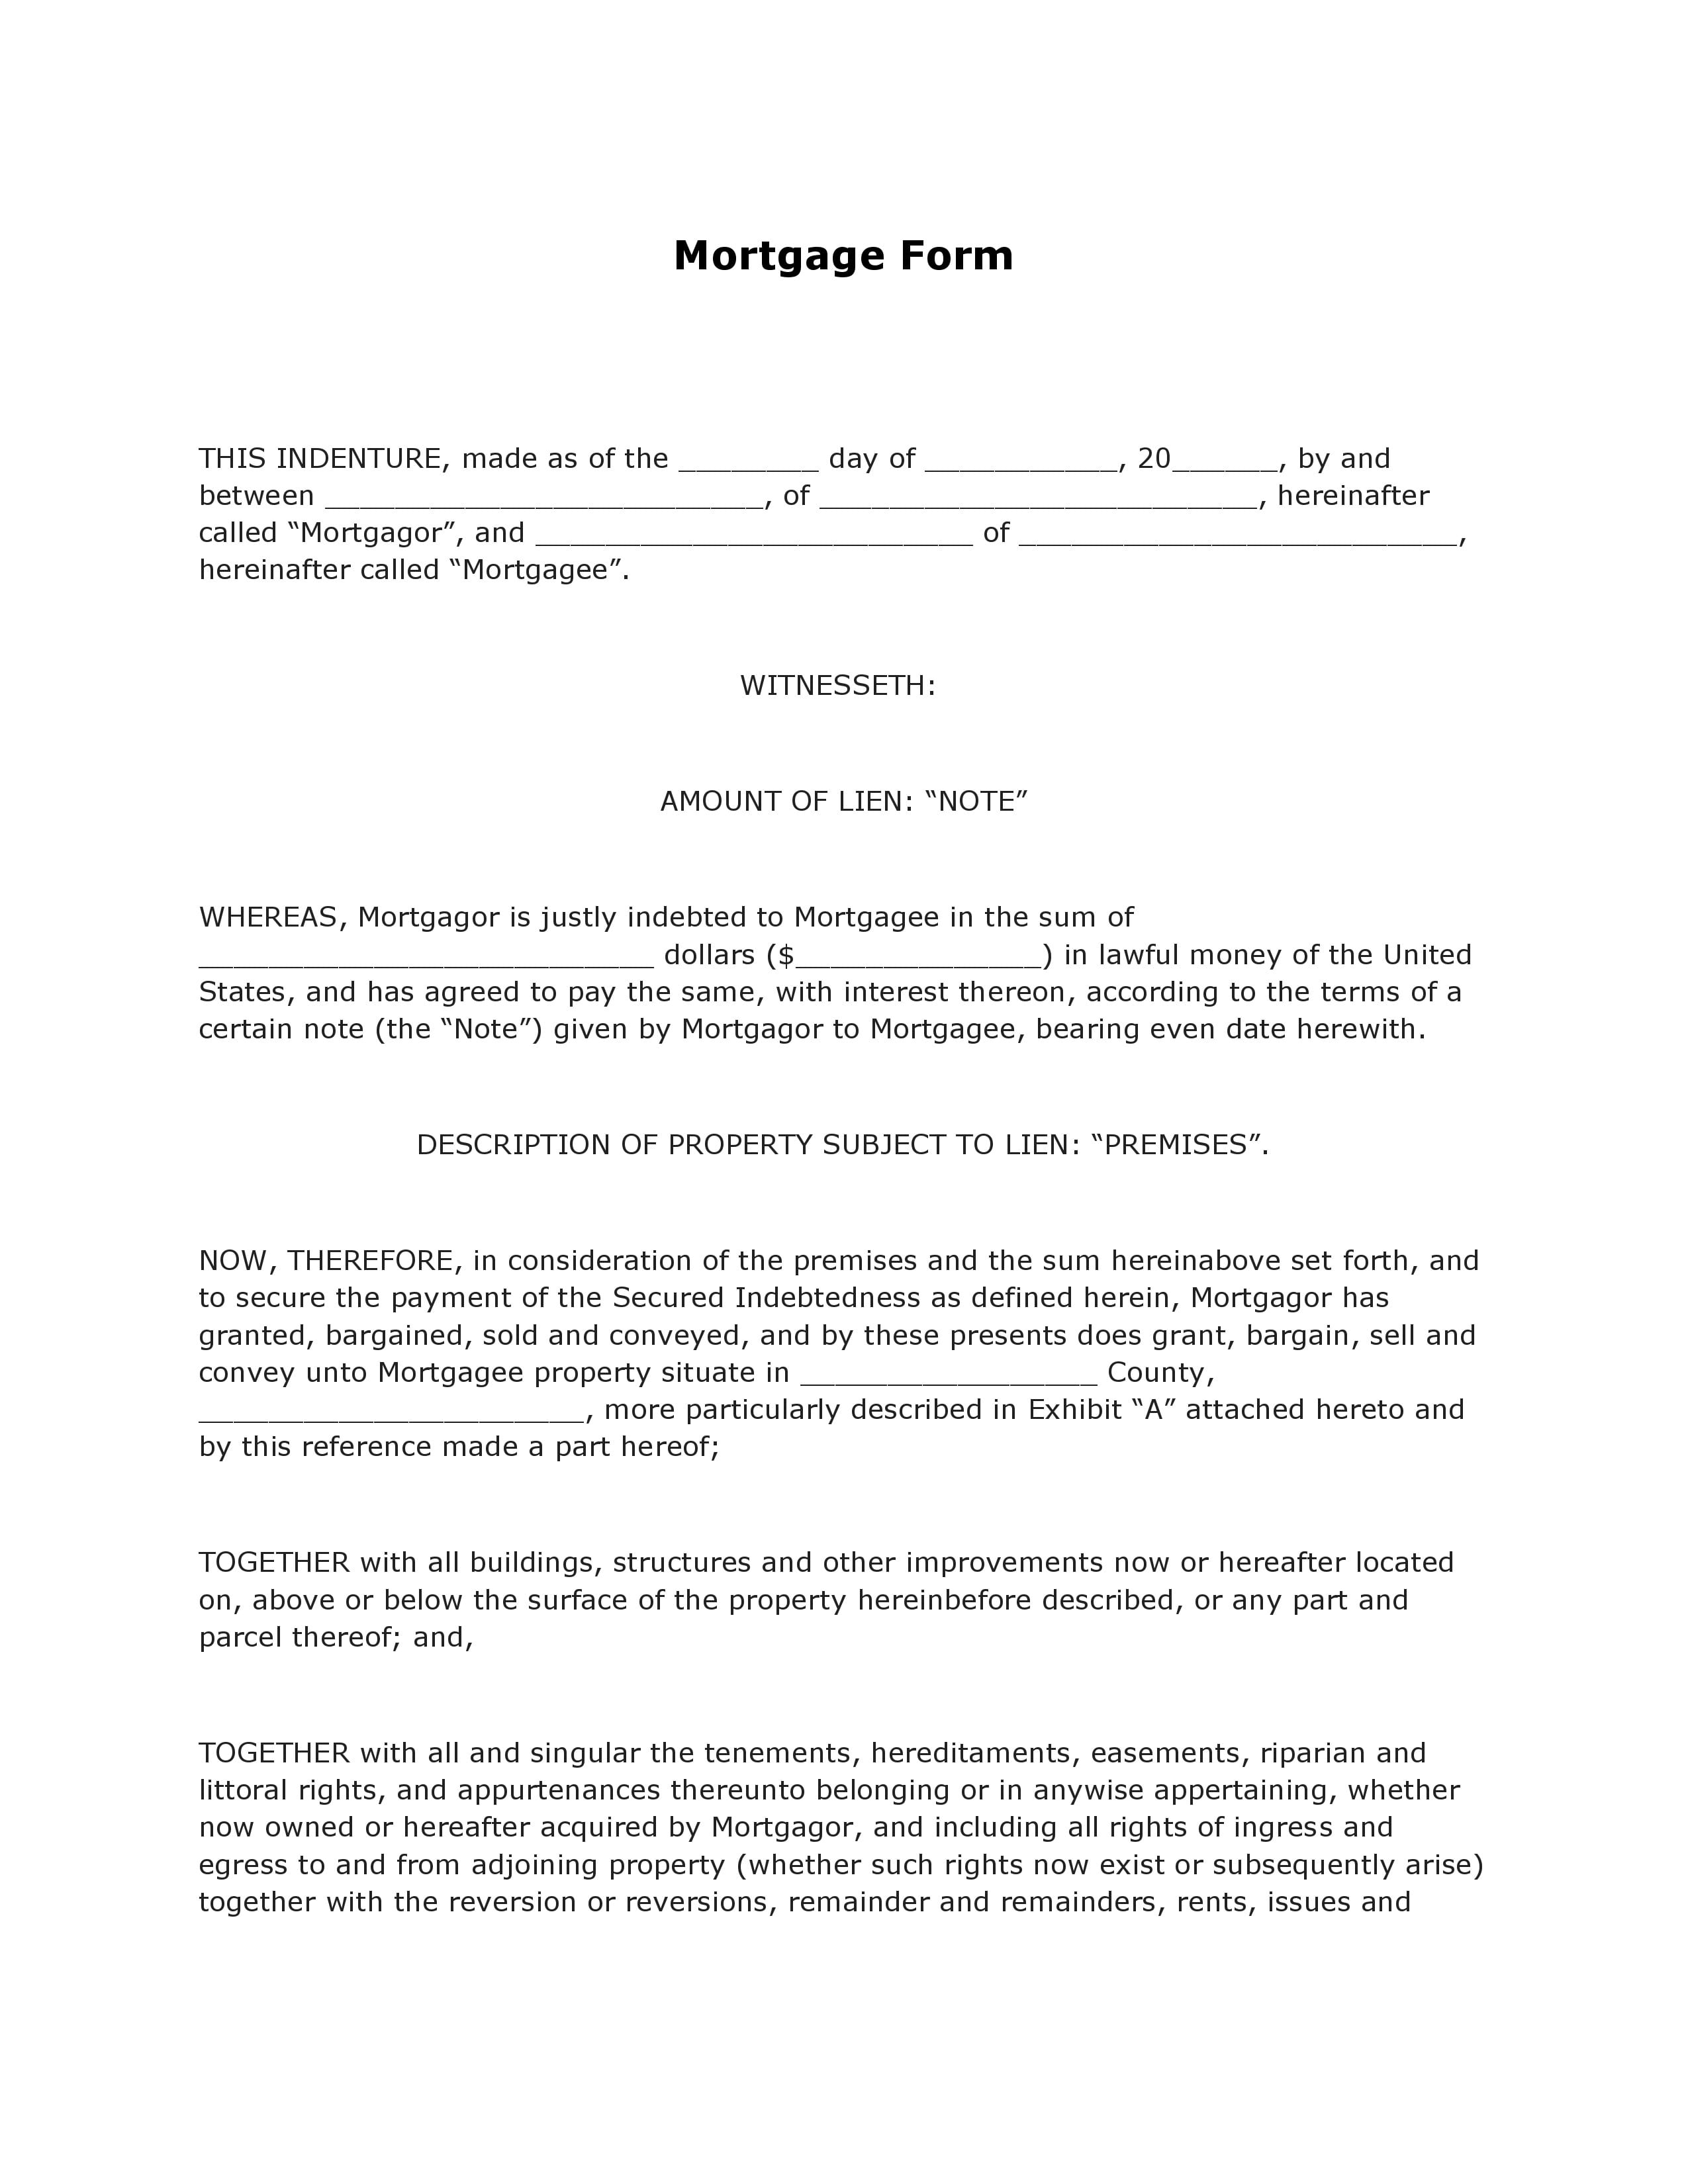 Assignment of mortgage without covenant united